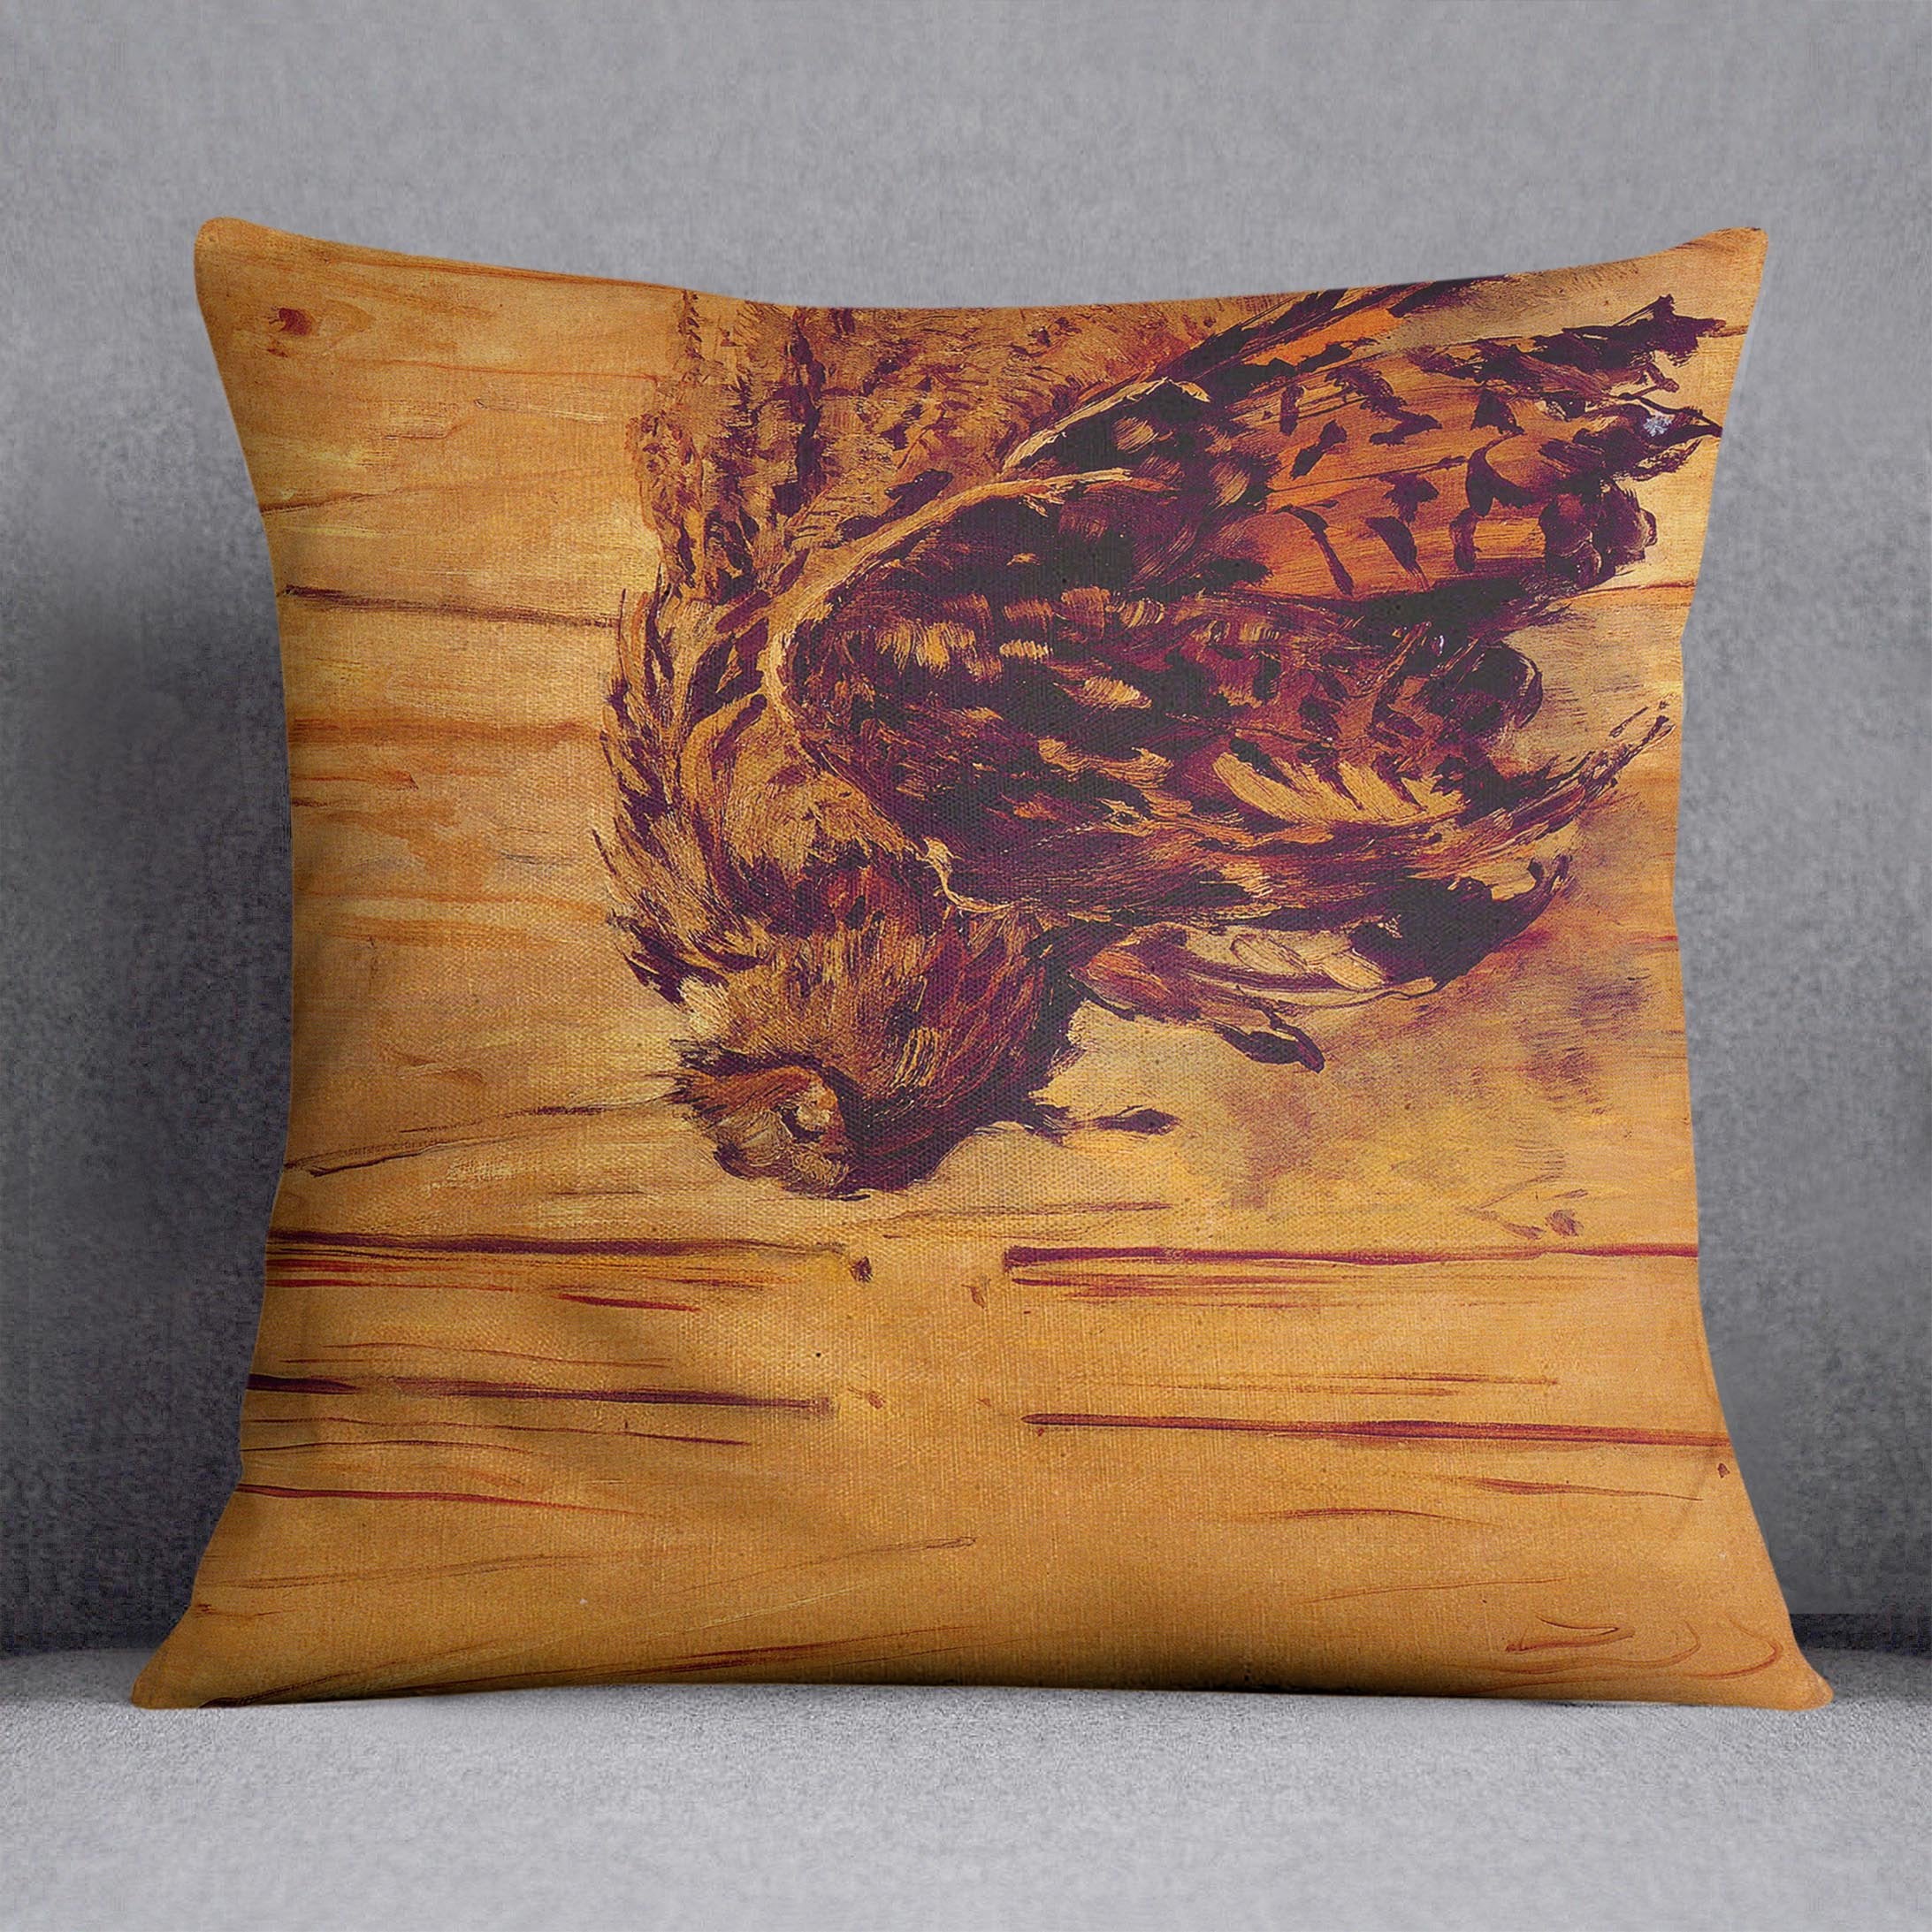 Dead Uhu by Manet Throw Pillow